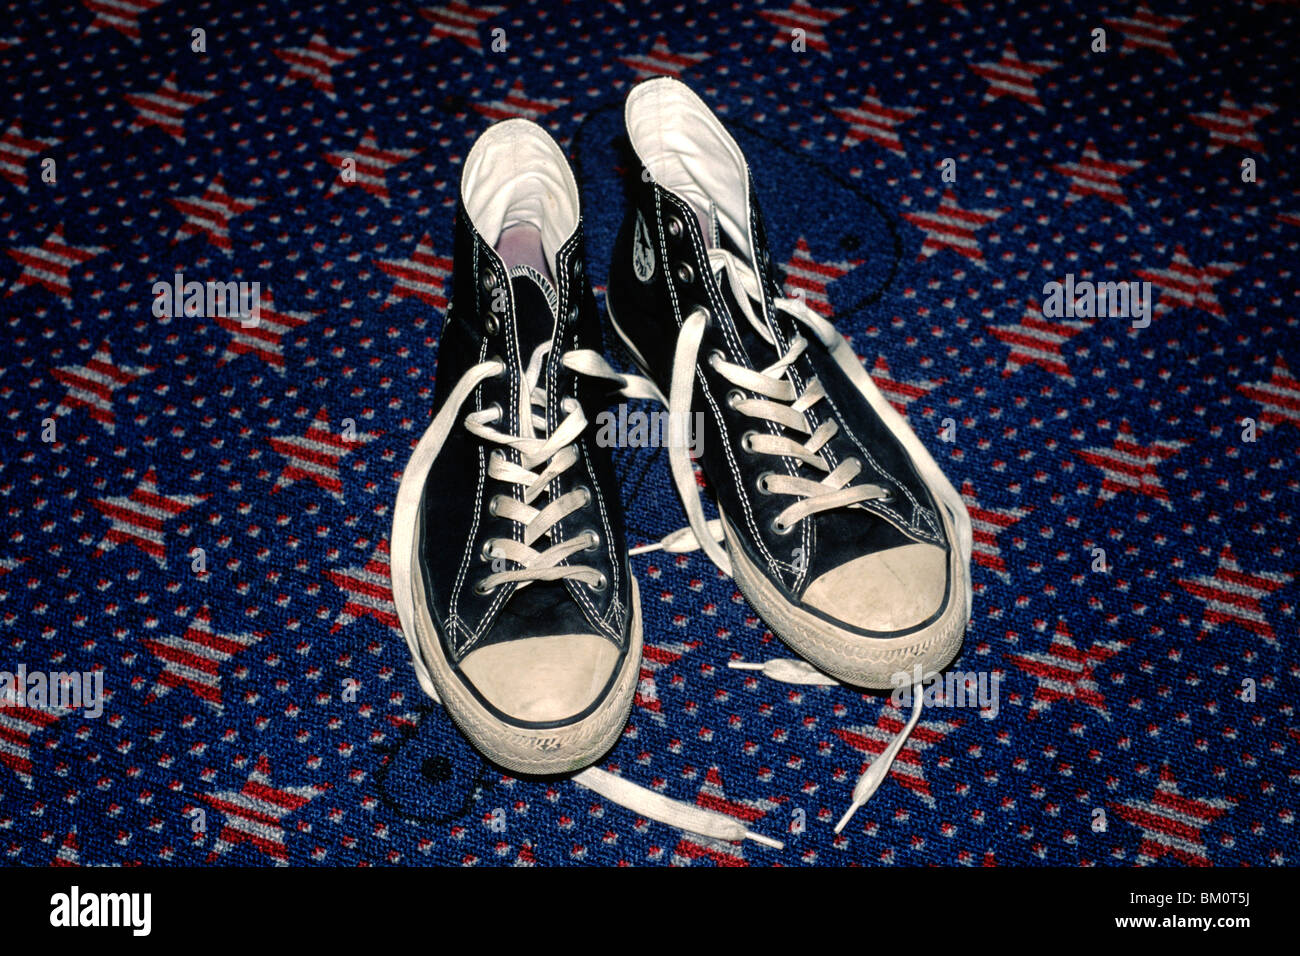 Converse Chucks on a star-patterned floor Stock Photo - Alamy